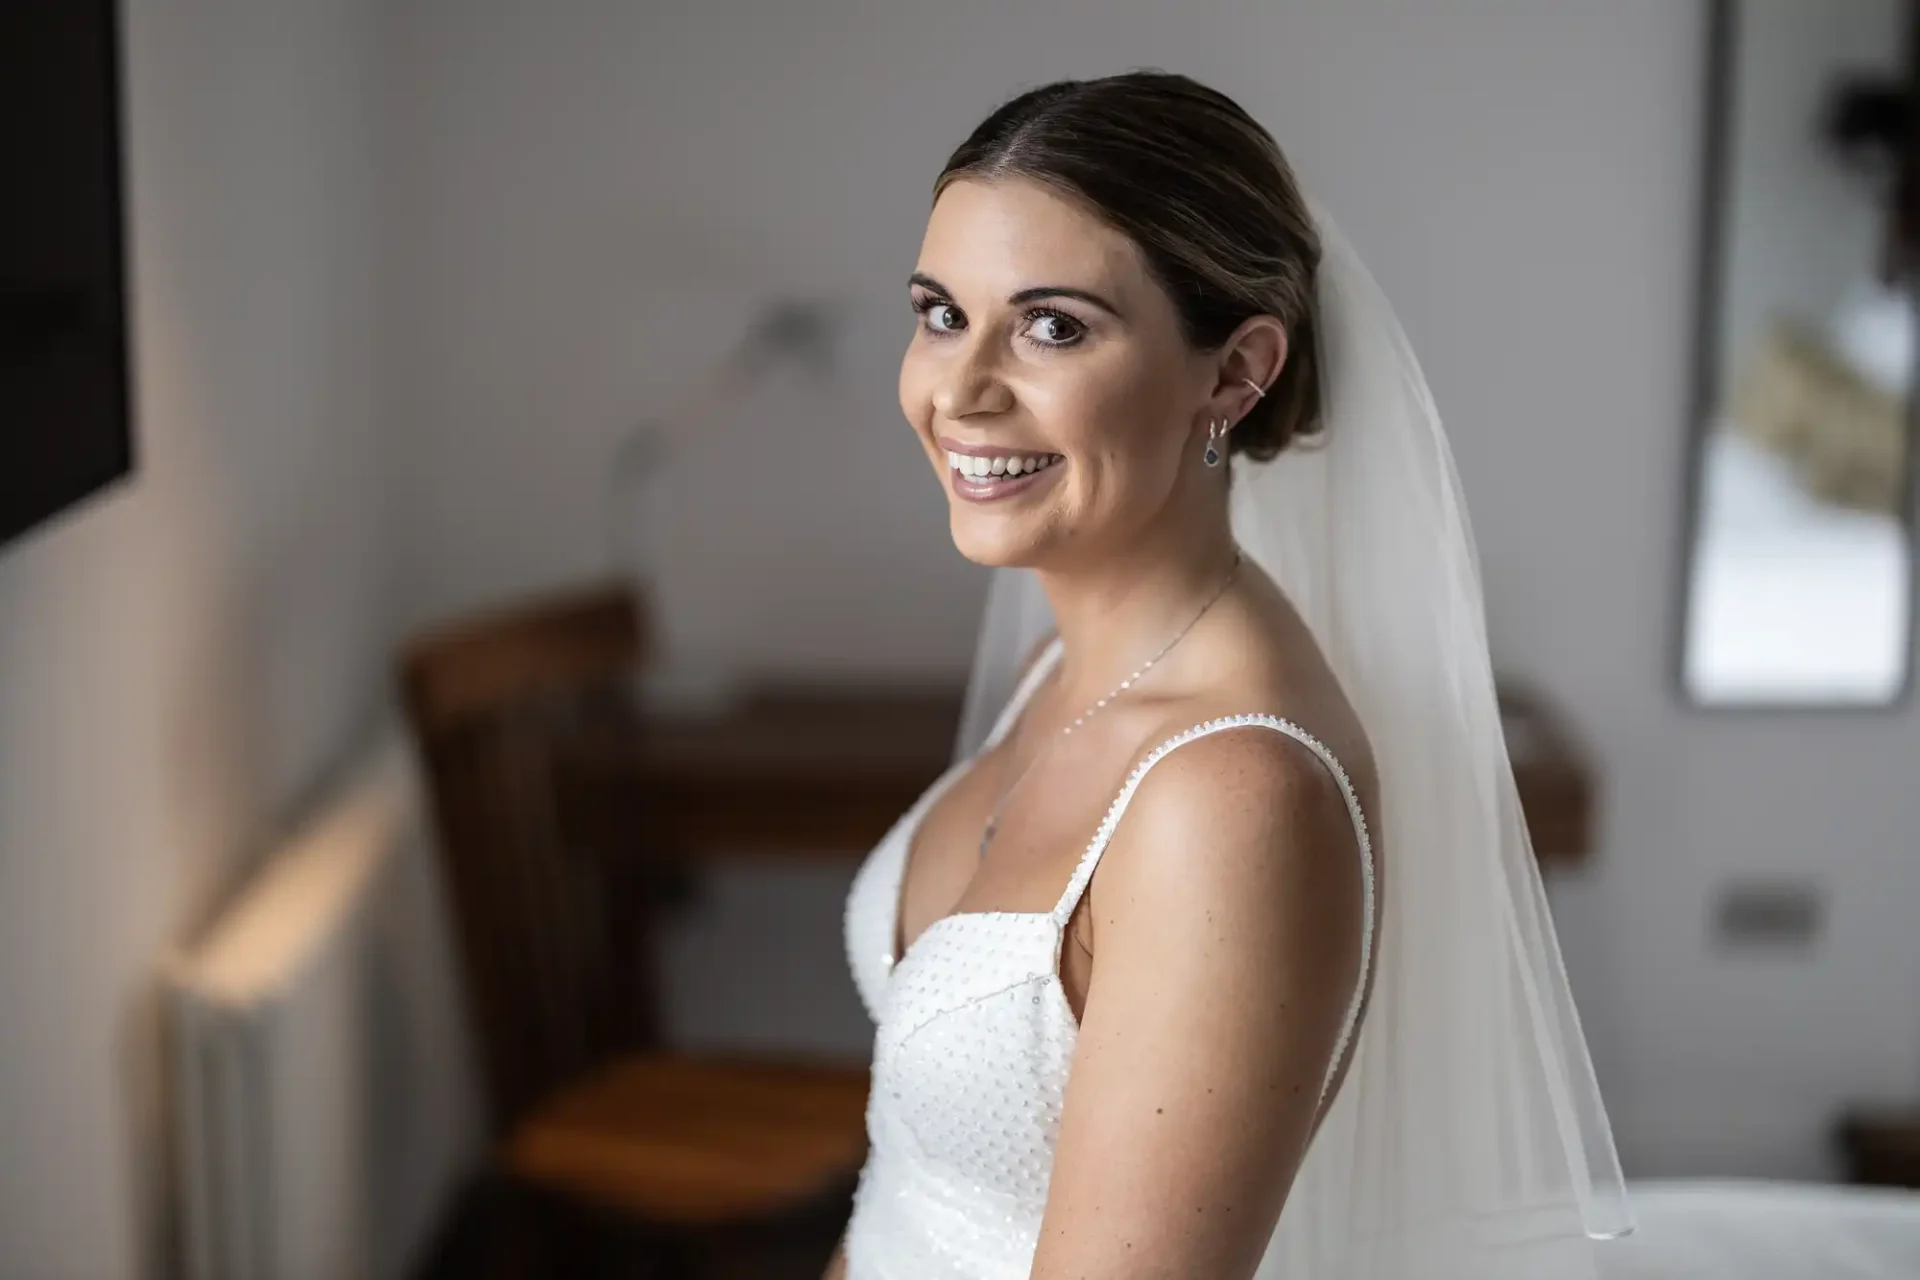 A bride in a white beaded wedding dress and veil smiling while looking over her shoulder in a softly lit room.